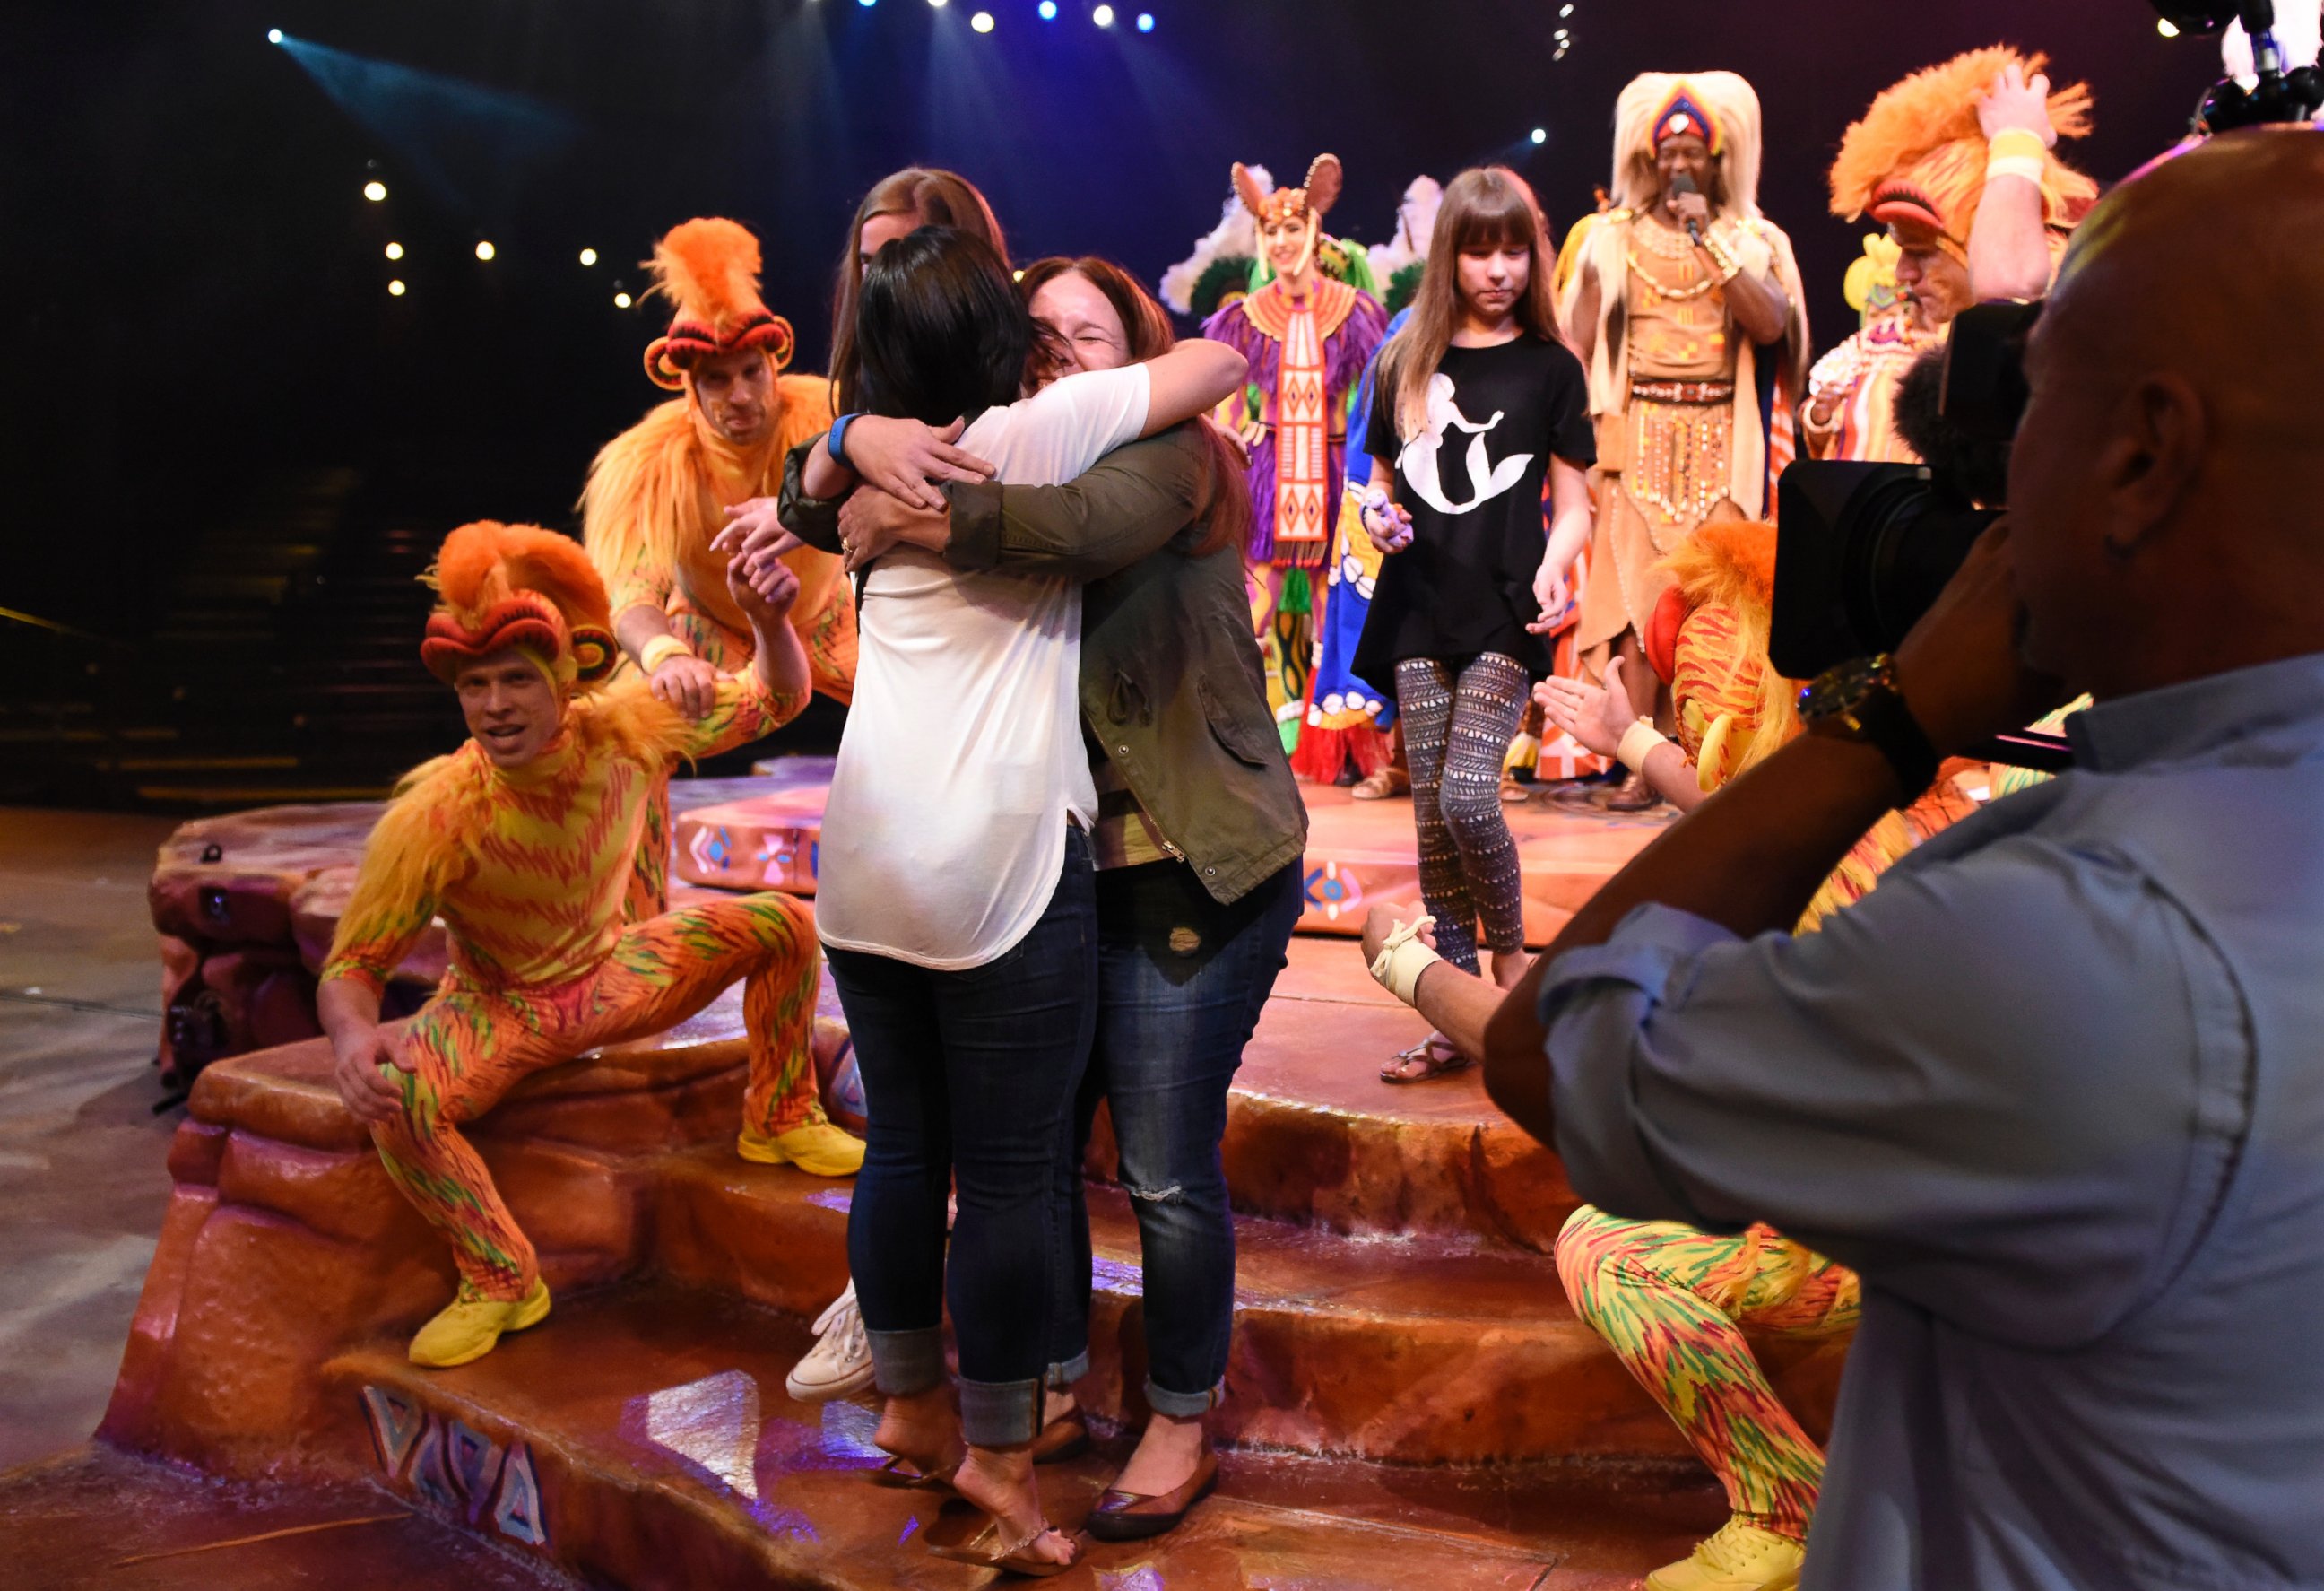 PHOTO: Oklahoma family celebrated a real "circle of life" moment at Disney's Animal Kingdom's Festival of the Lion King show with "Good Morning America Weekend" meteorologist Rob Marciano.